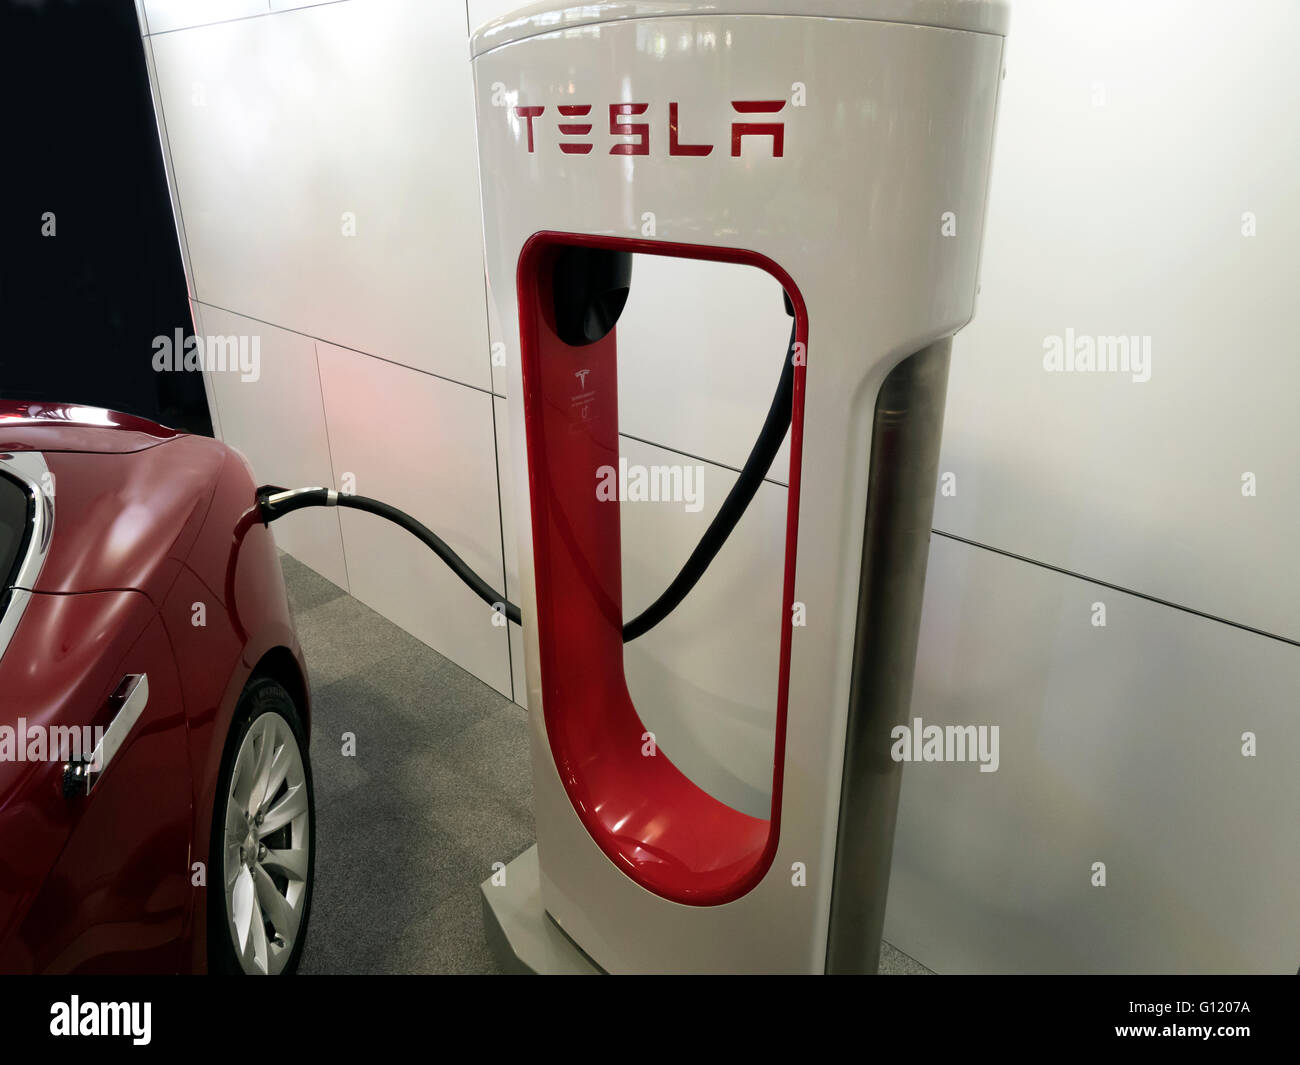 Tesla Electric automobile on charge at Tesla charging point Stock Photo